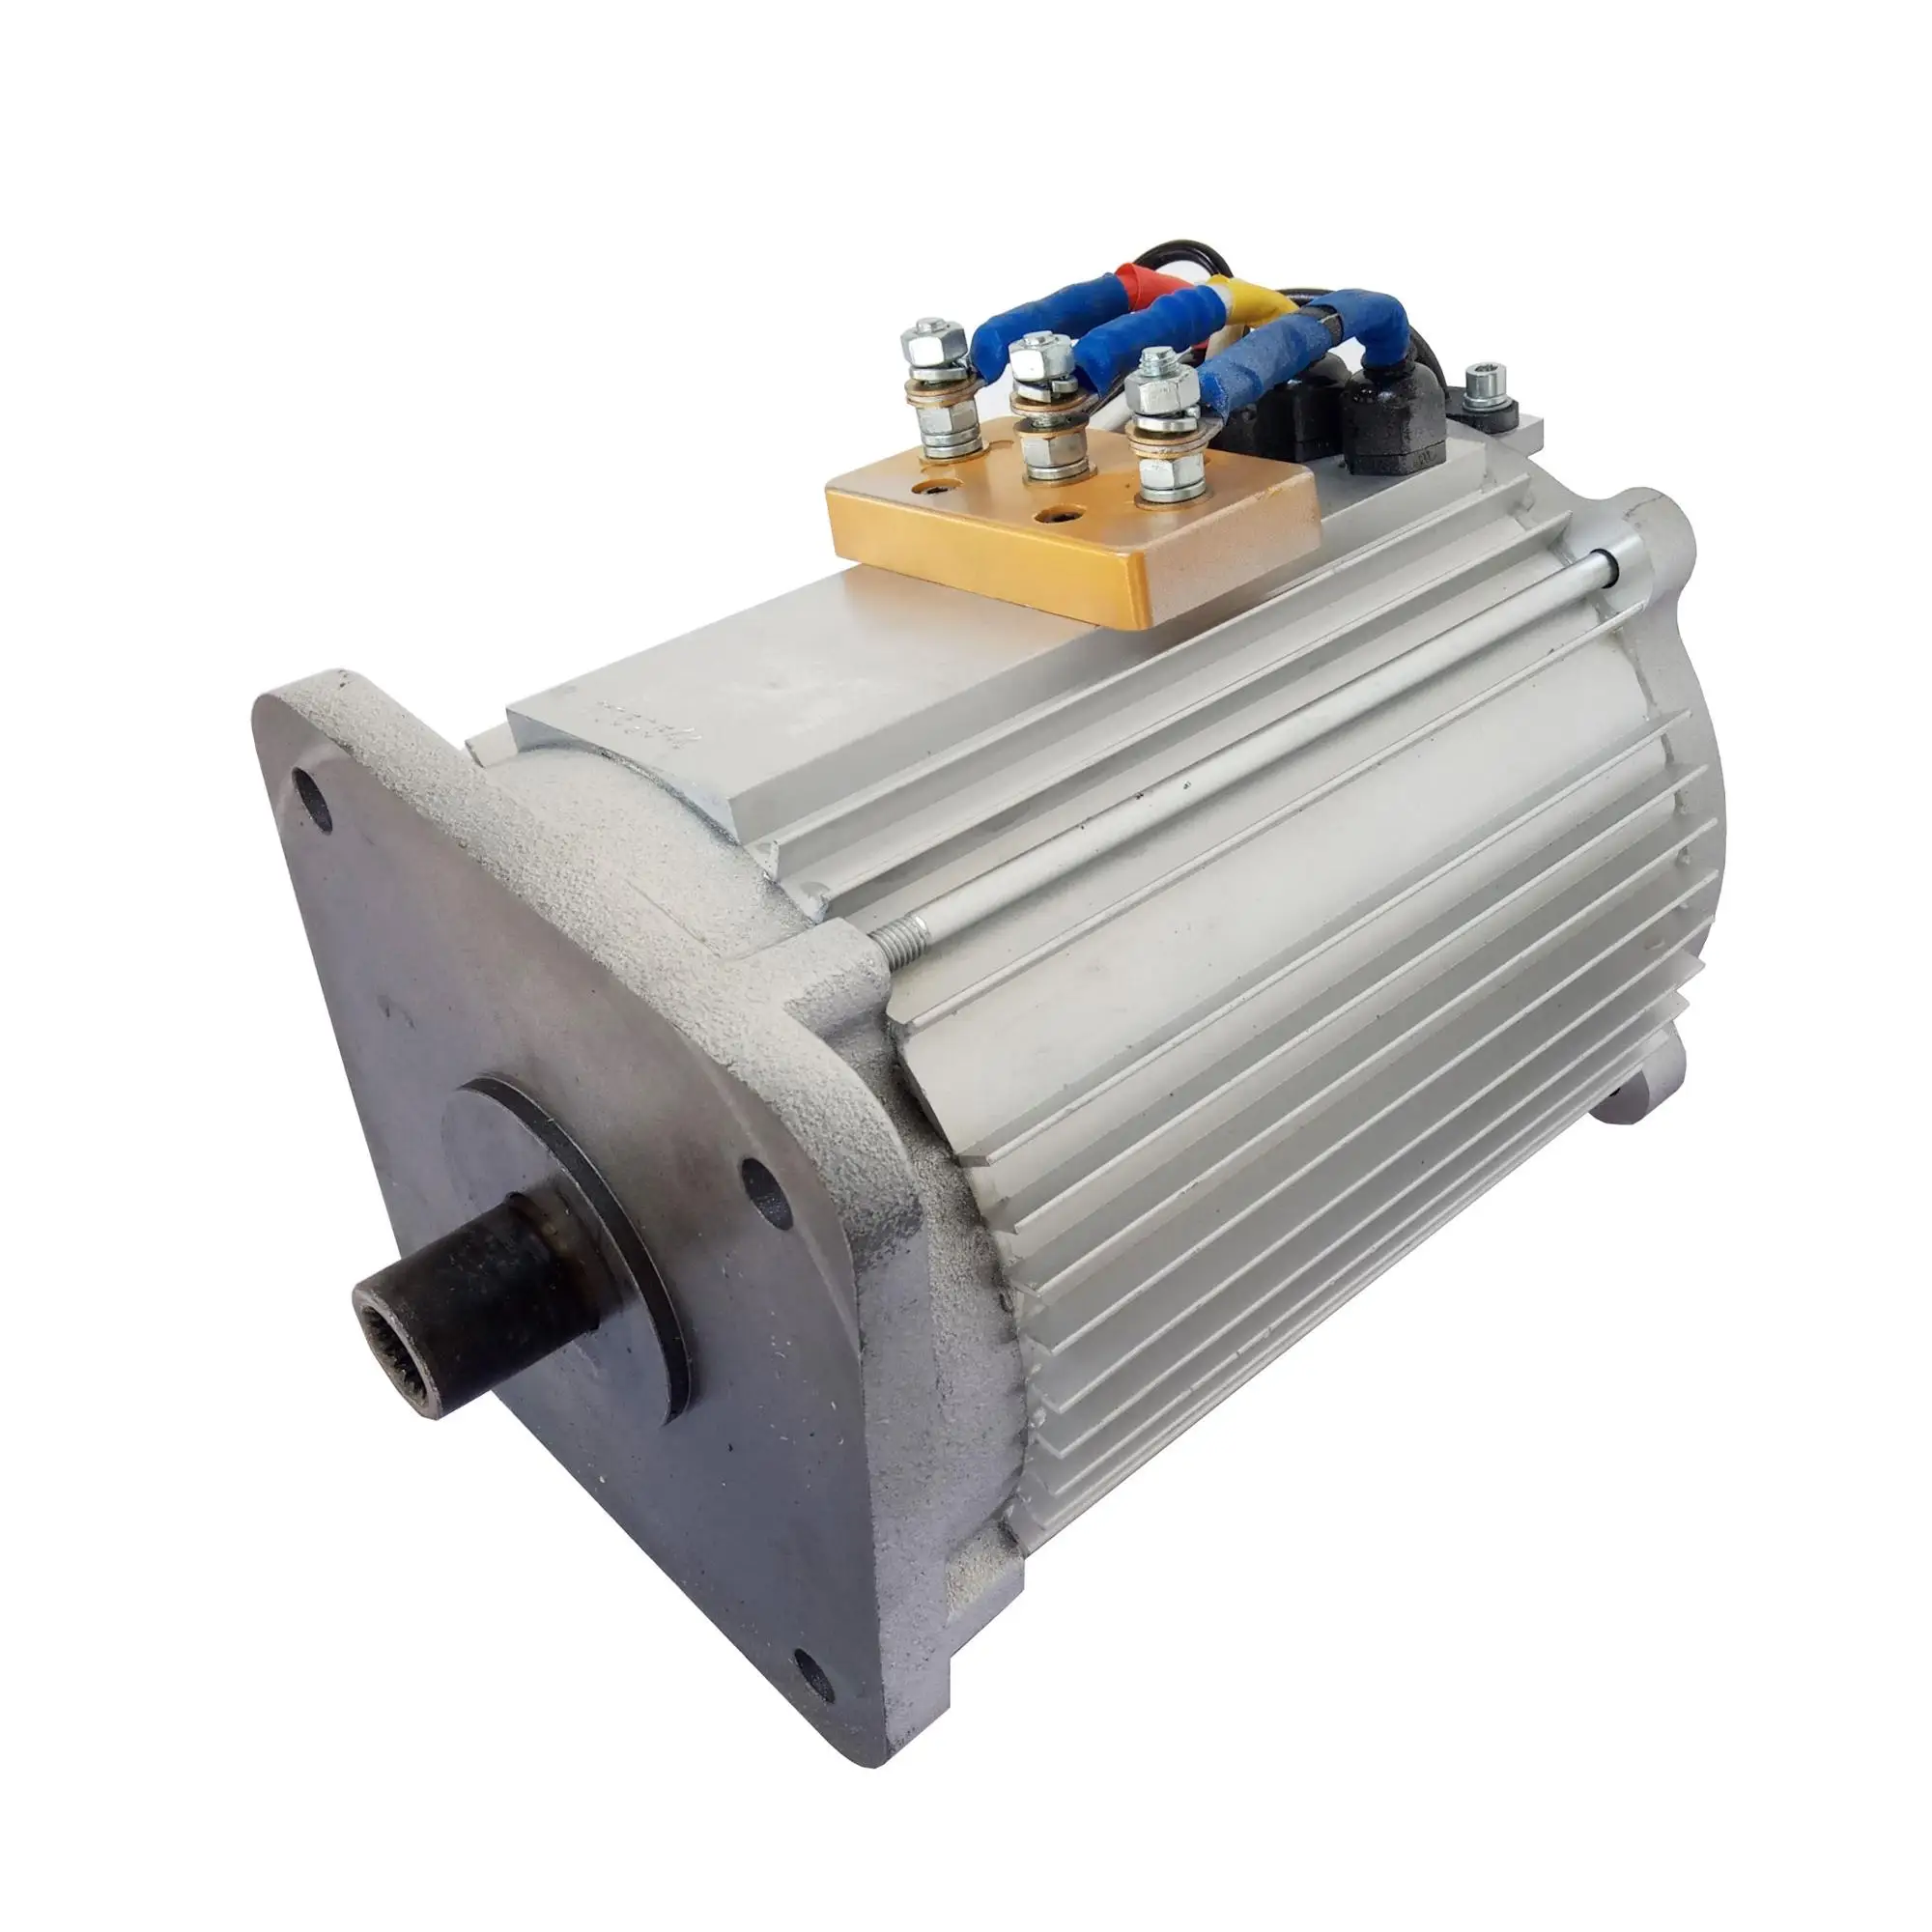 Predictor Young lady Ideally Shinegle 60kw (30kw) Pmsm Motor Vibration Motor Conversion Kit Electric Car  For Light Truck / Car / Suv / Van / Mini Bus - Buy Vibration Motor,Auto Ac  Motor,Elektrikli Motor Product on Alibaba.com